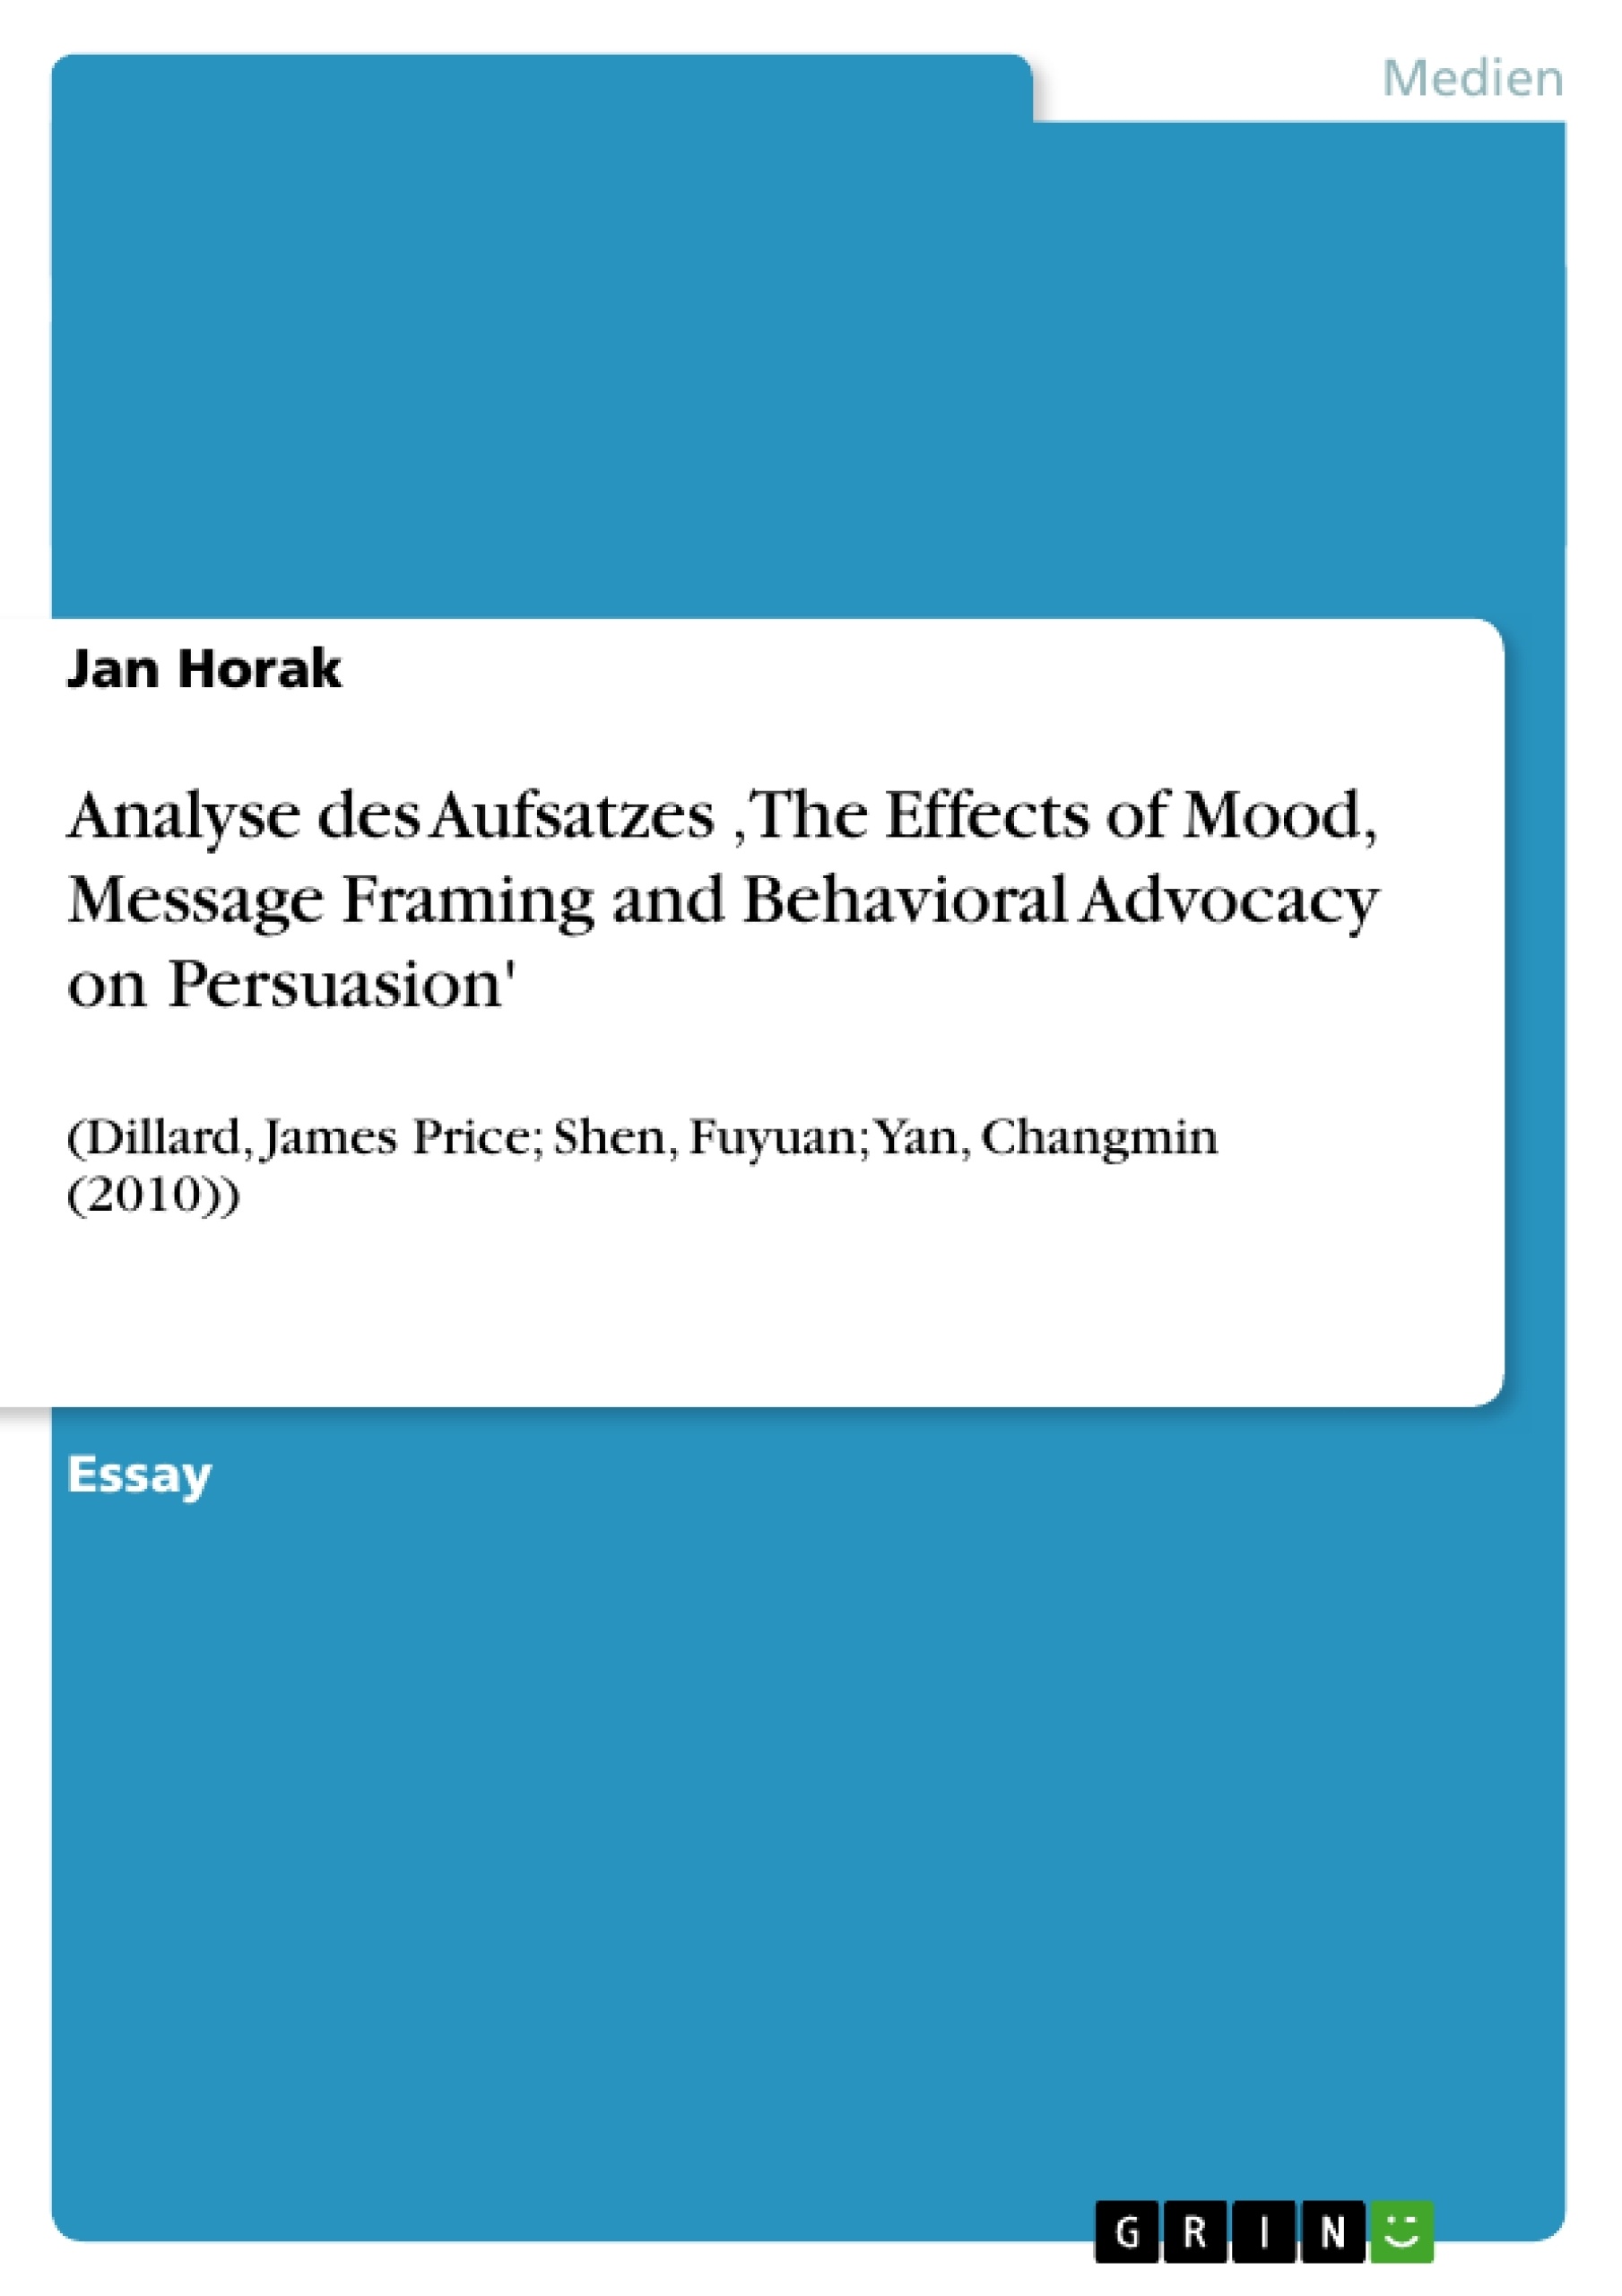 Titre: Analyse des Aufsatzes ‚The Effects of Mood, Message Framing and Behavioral Advocacy on Persuasion'